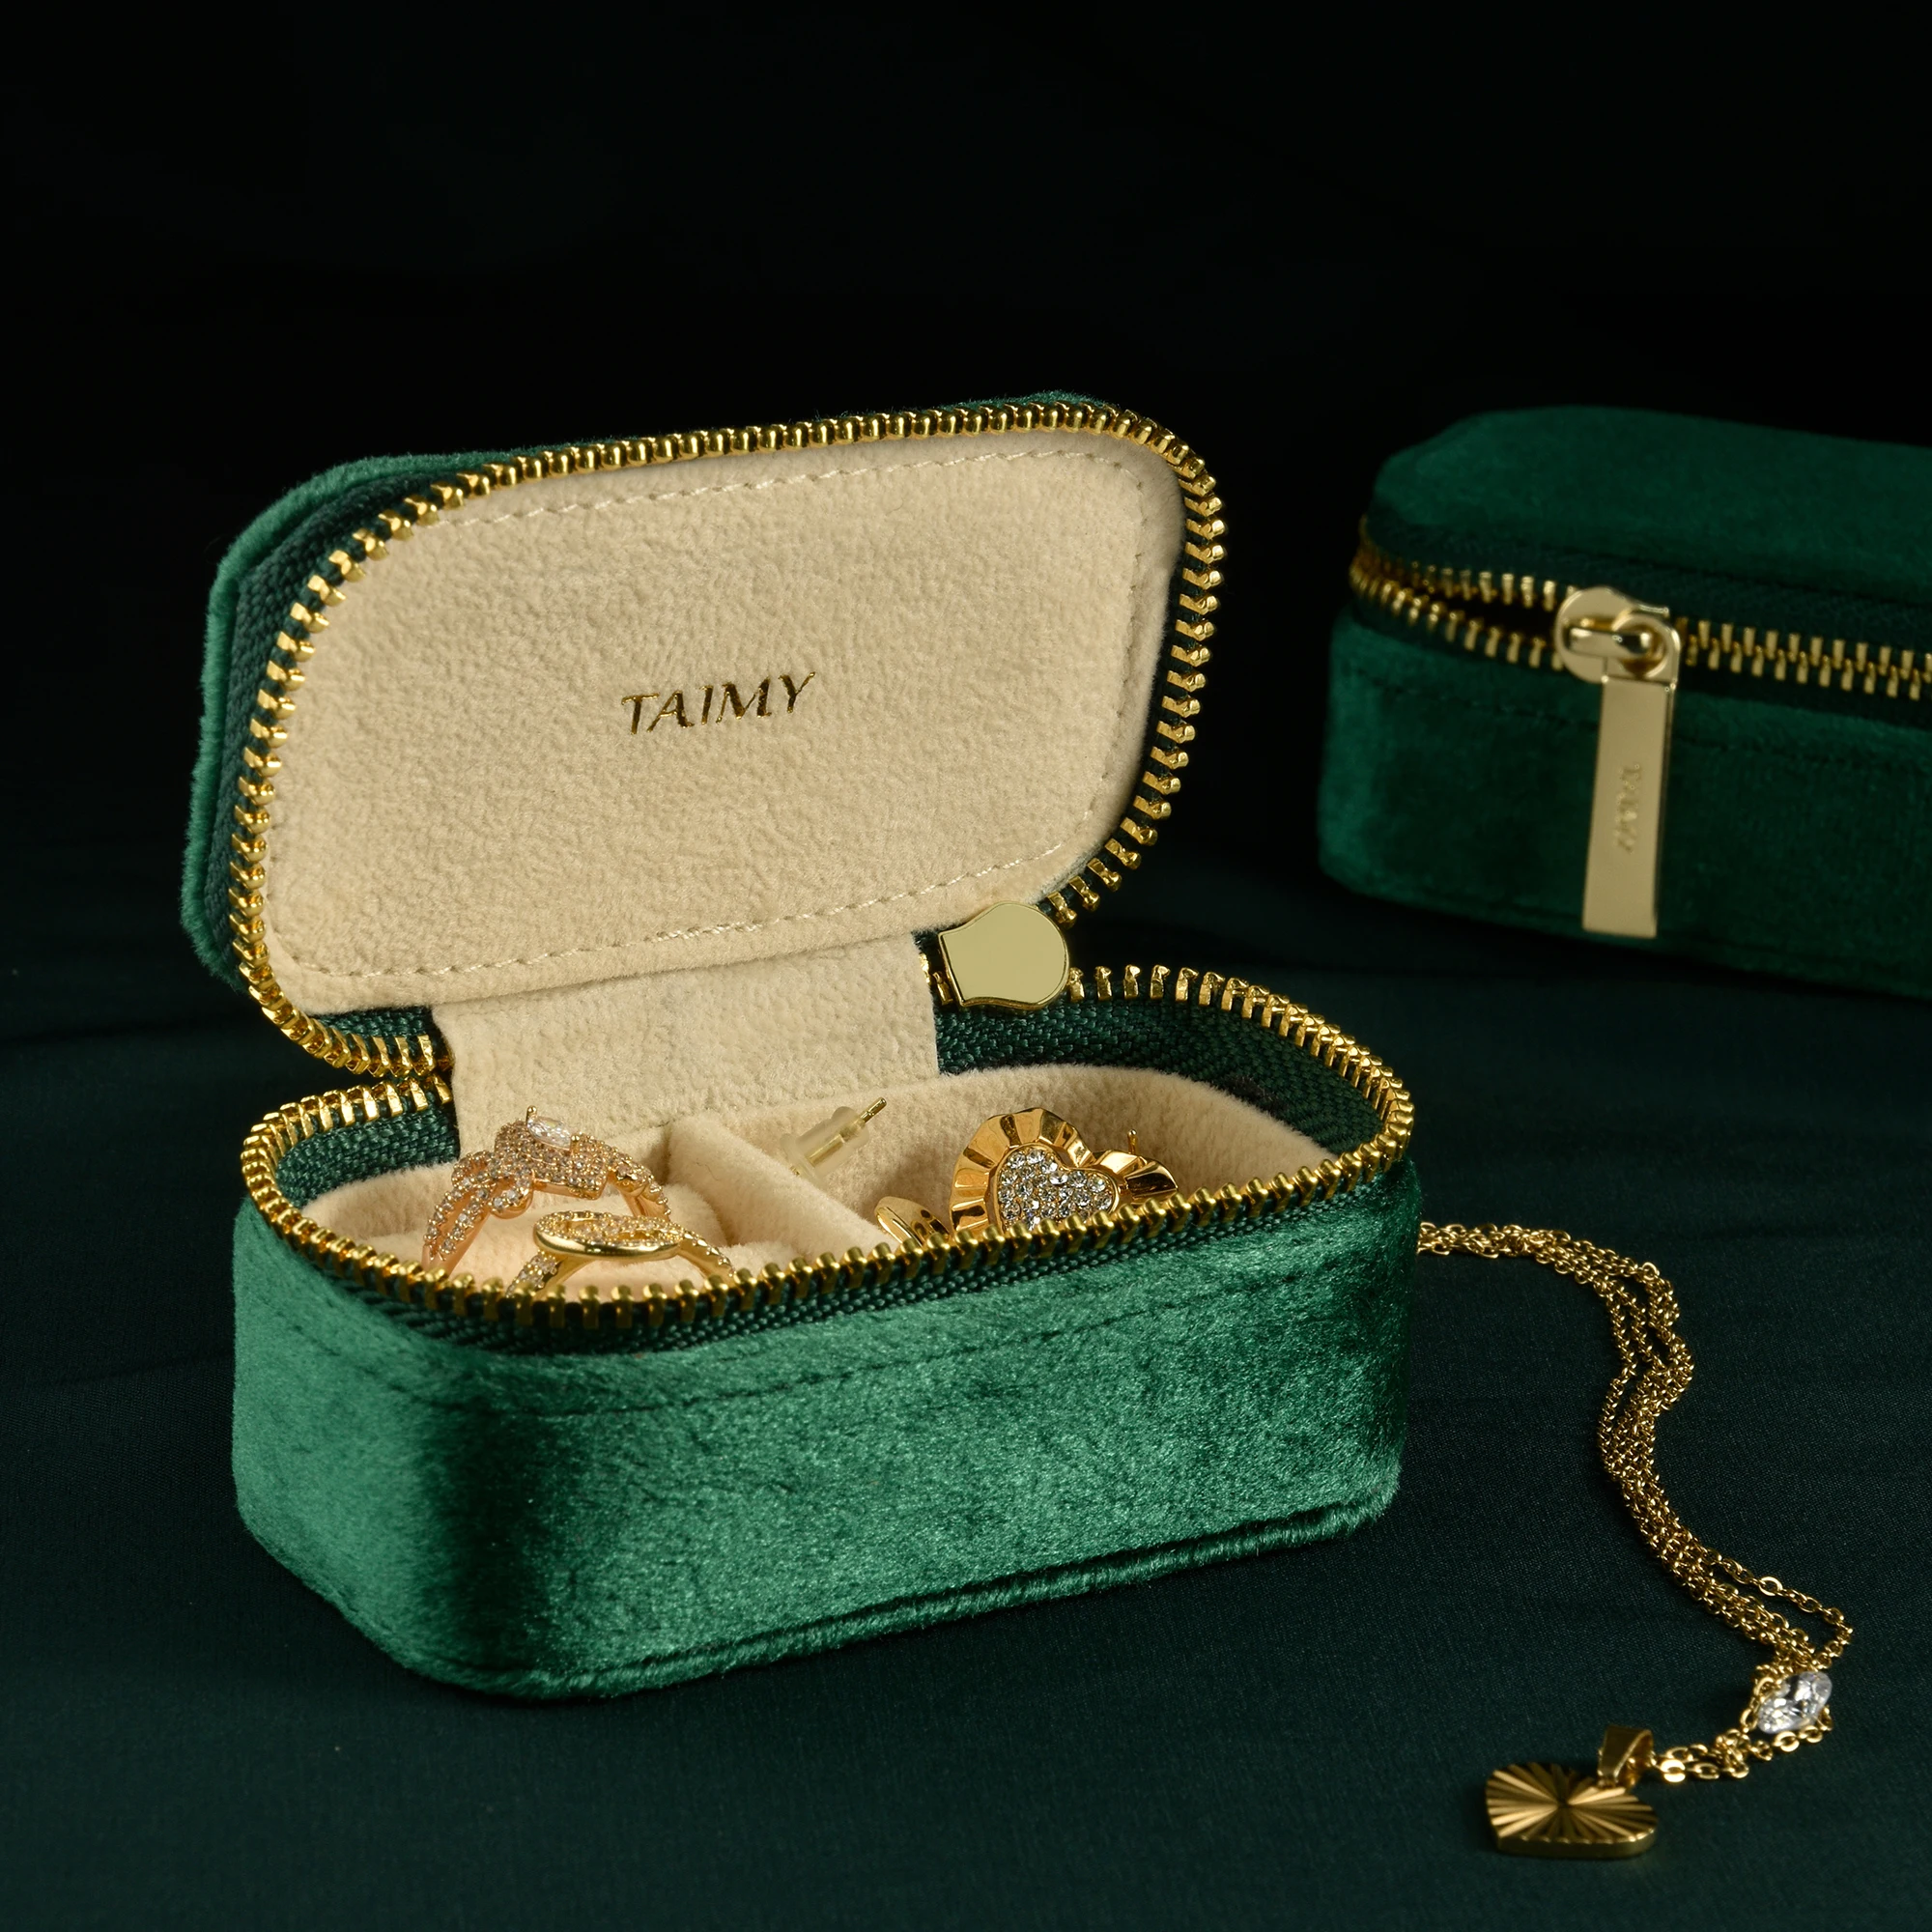 TAIMY European retro jewelry ring necklace storage box is suitable for travel, party, business trip and portable